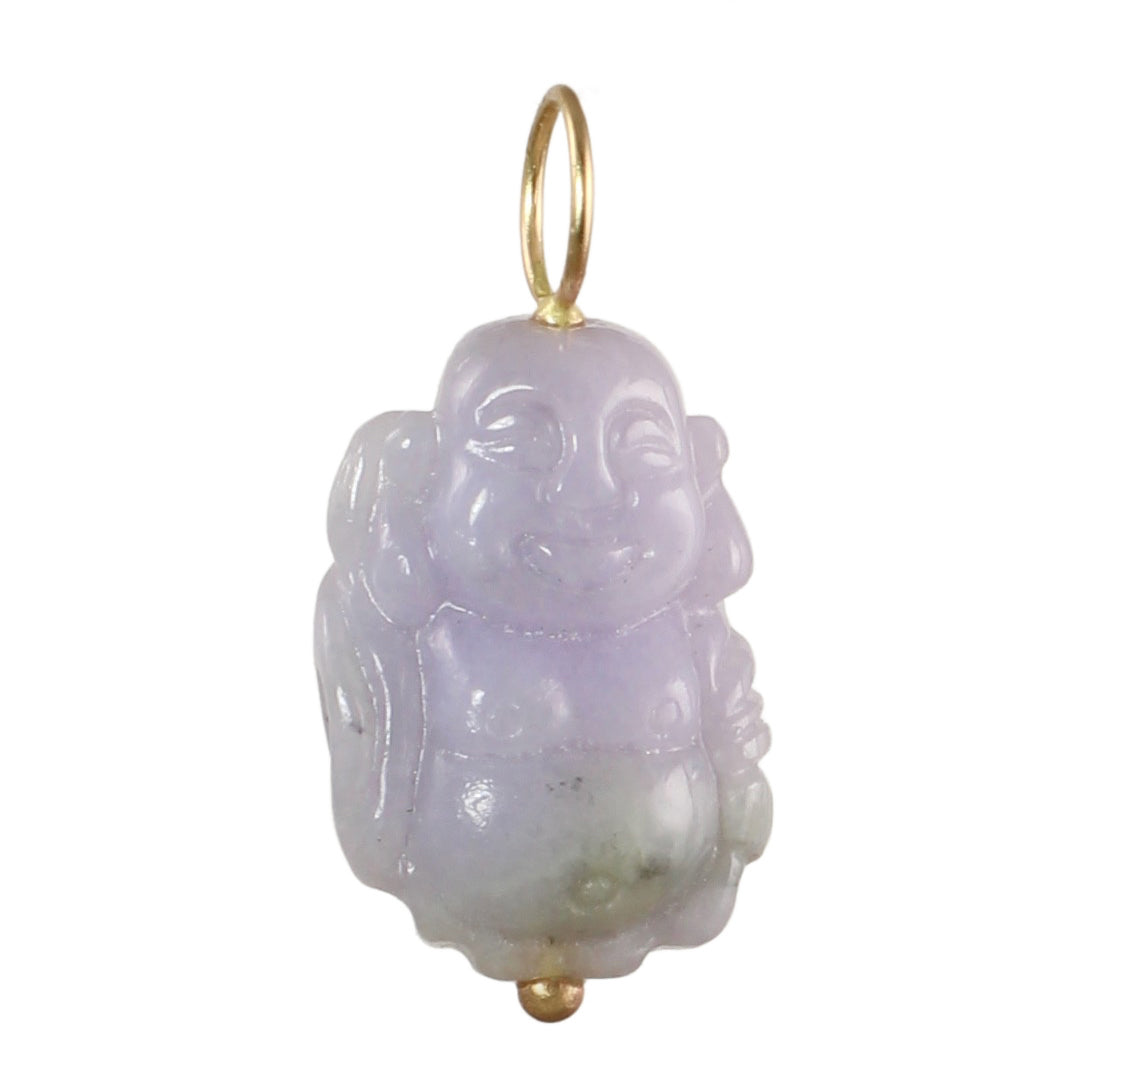 Vintage Buddha Charm in 14k Gold - Limited Edition